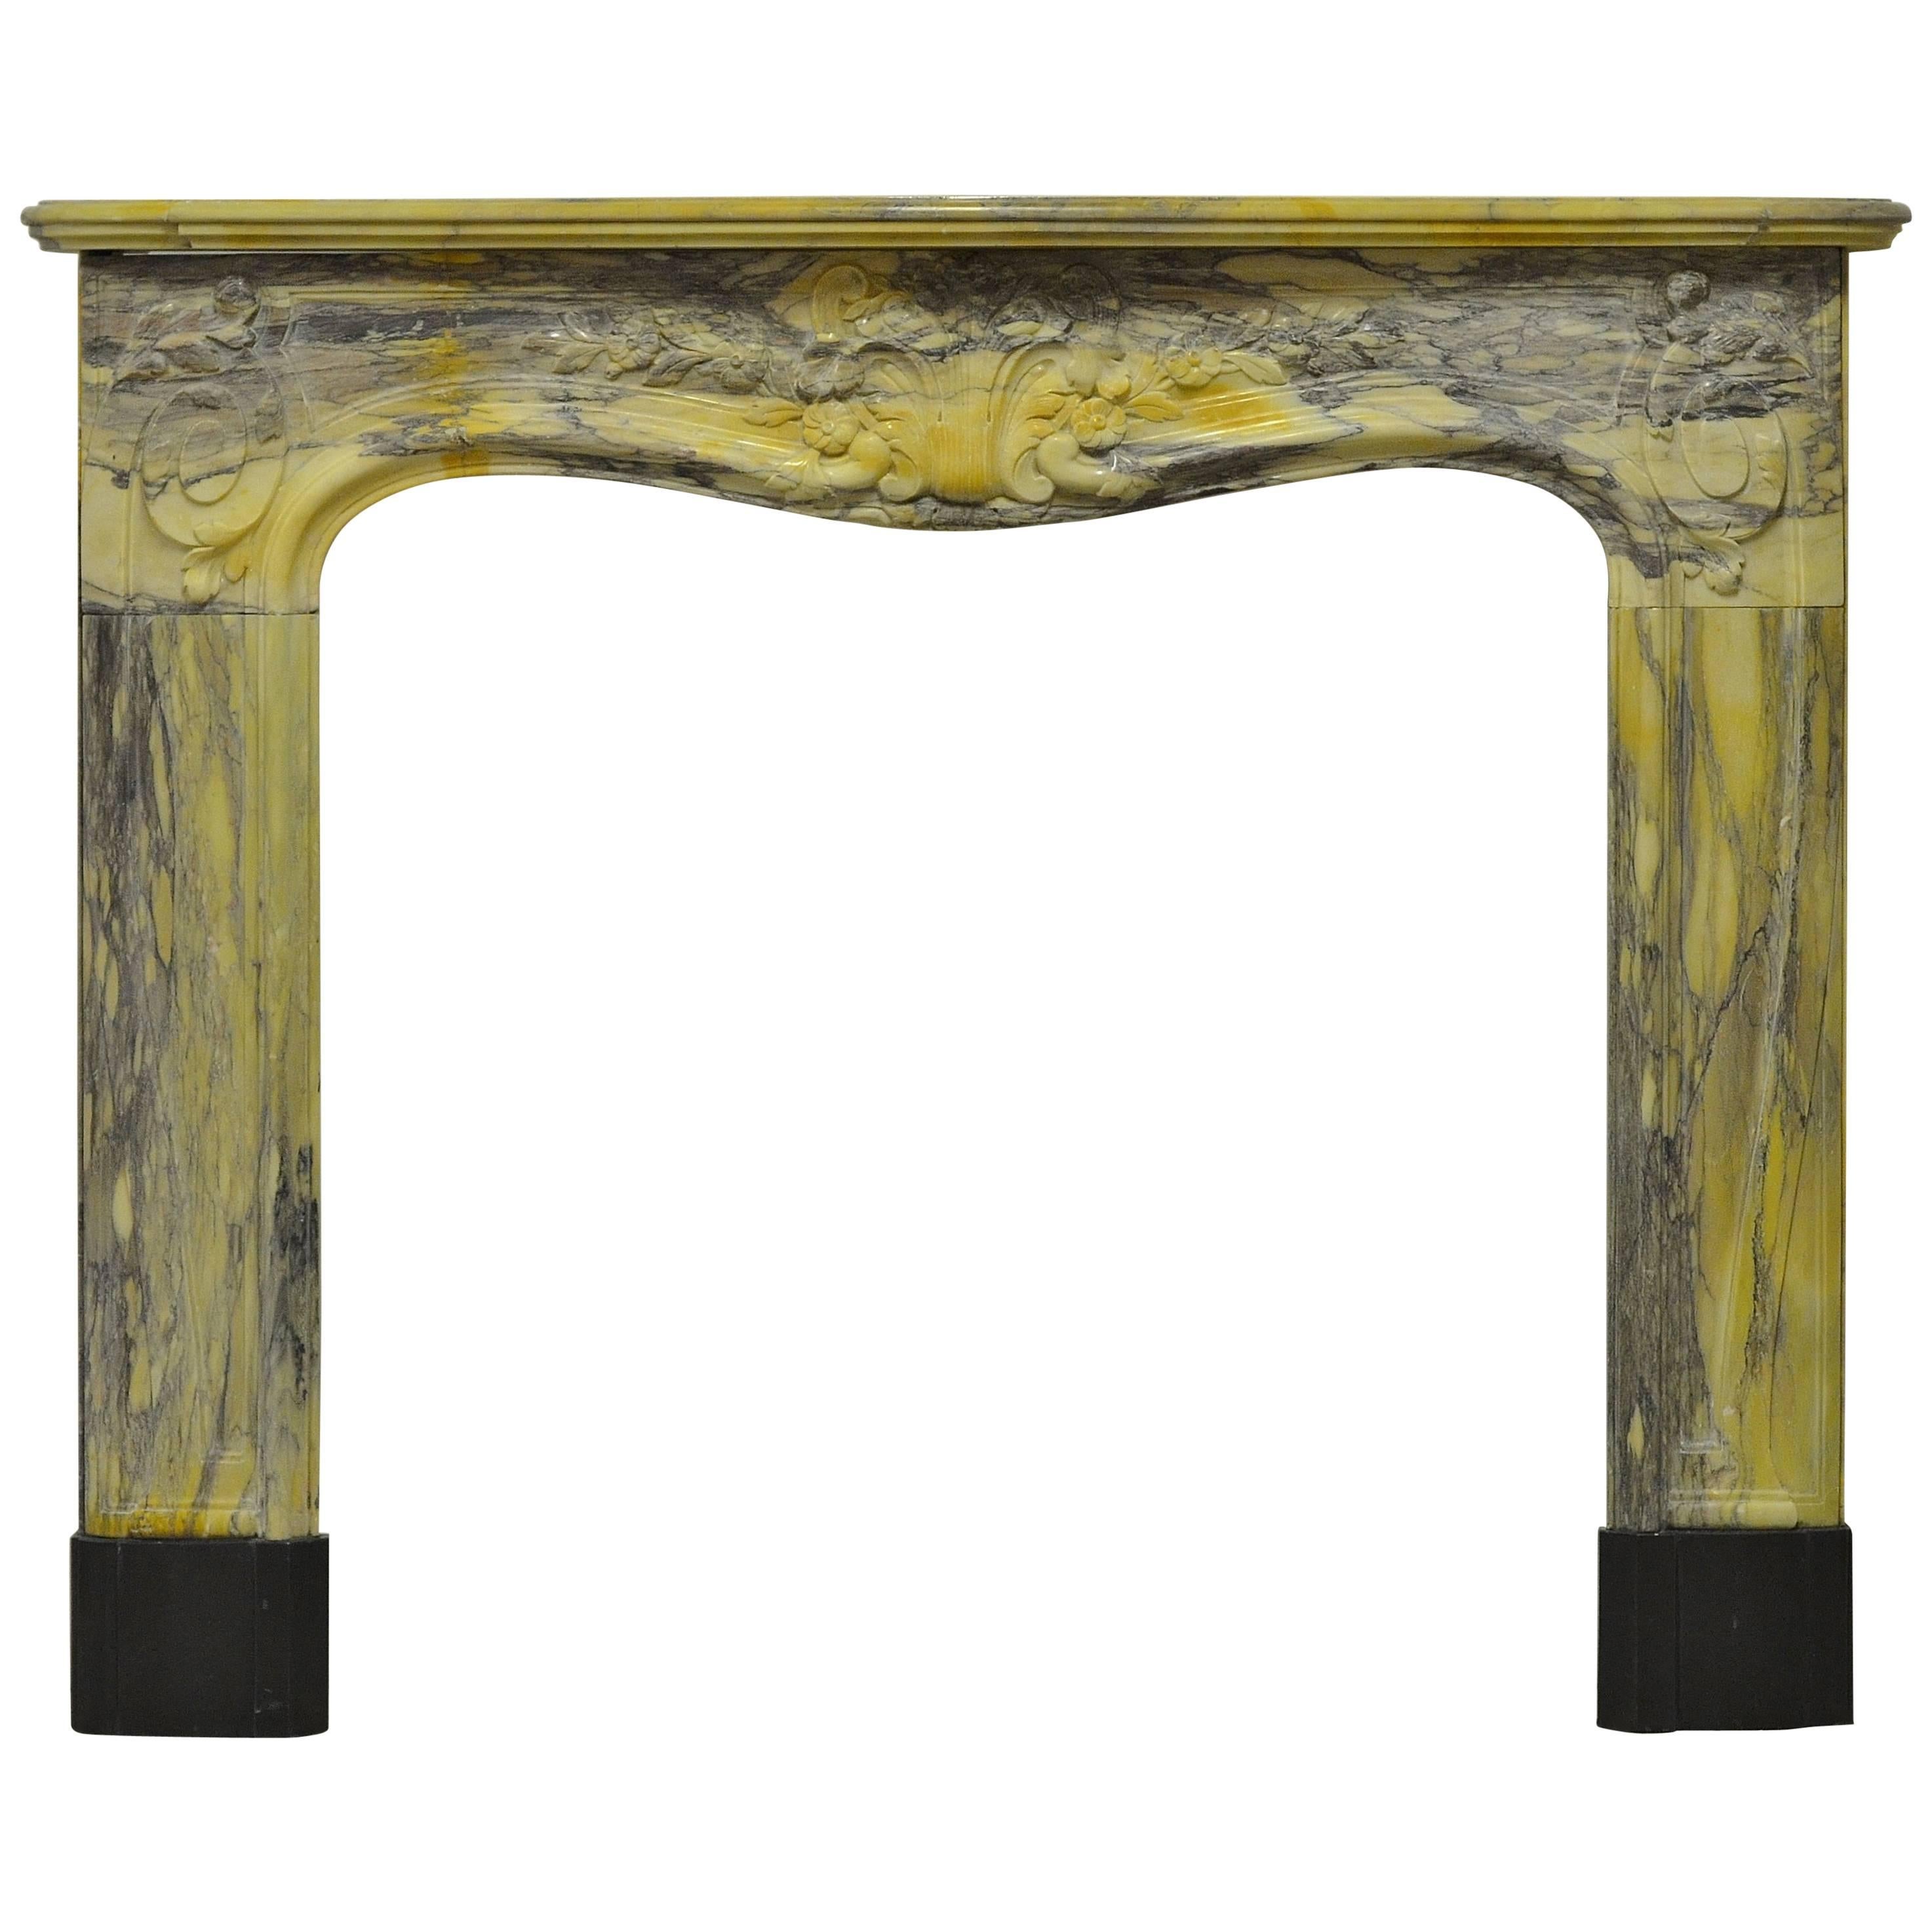  Colorful Marble Louis XV Fireplace Mantel